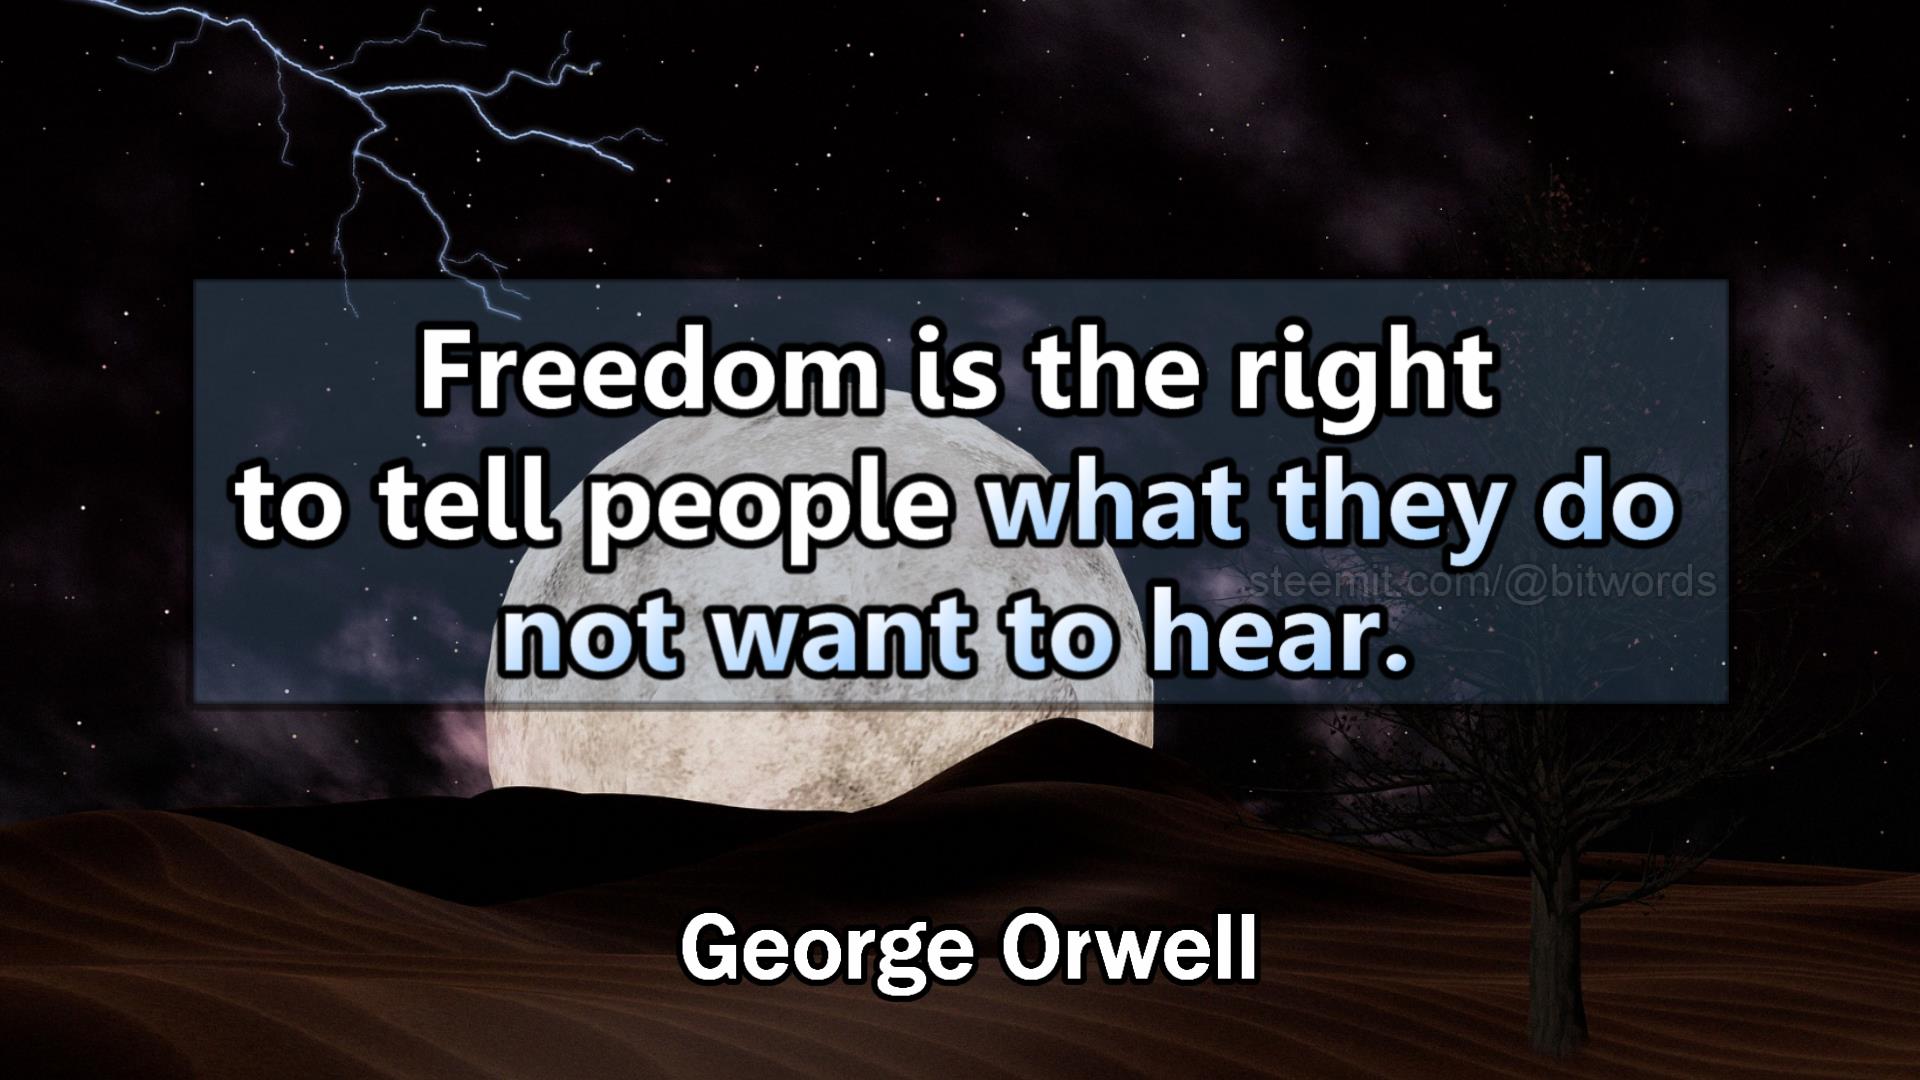 bitwords steemit quote of the day george orwell.jpg